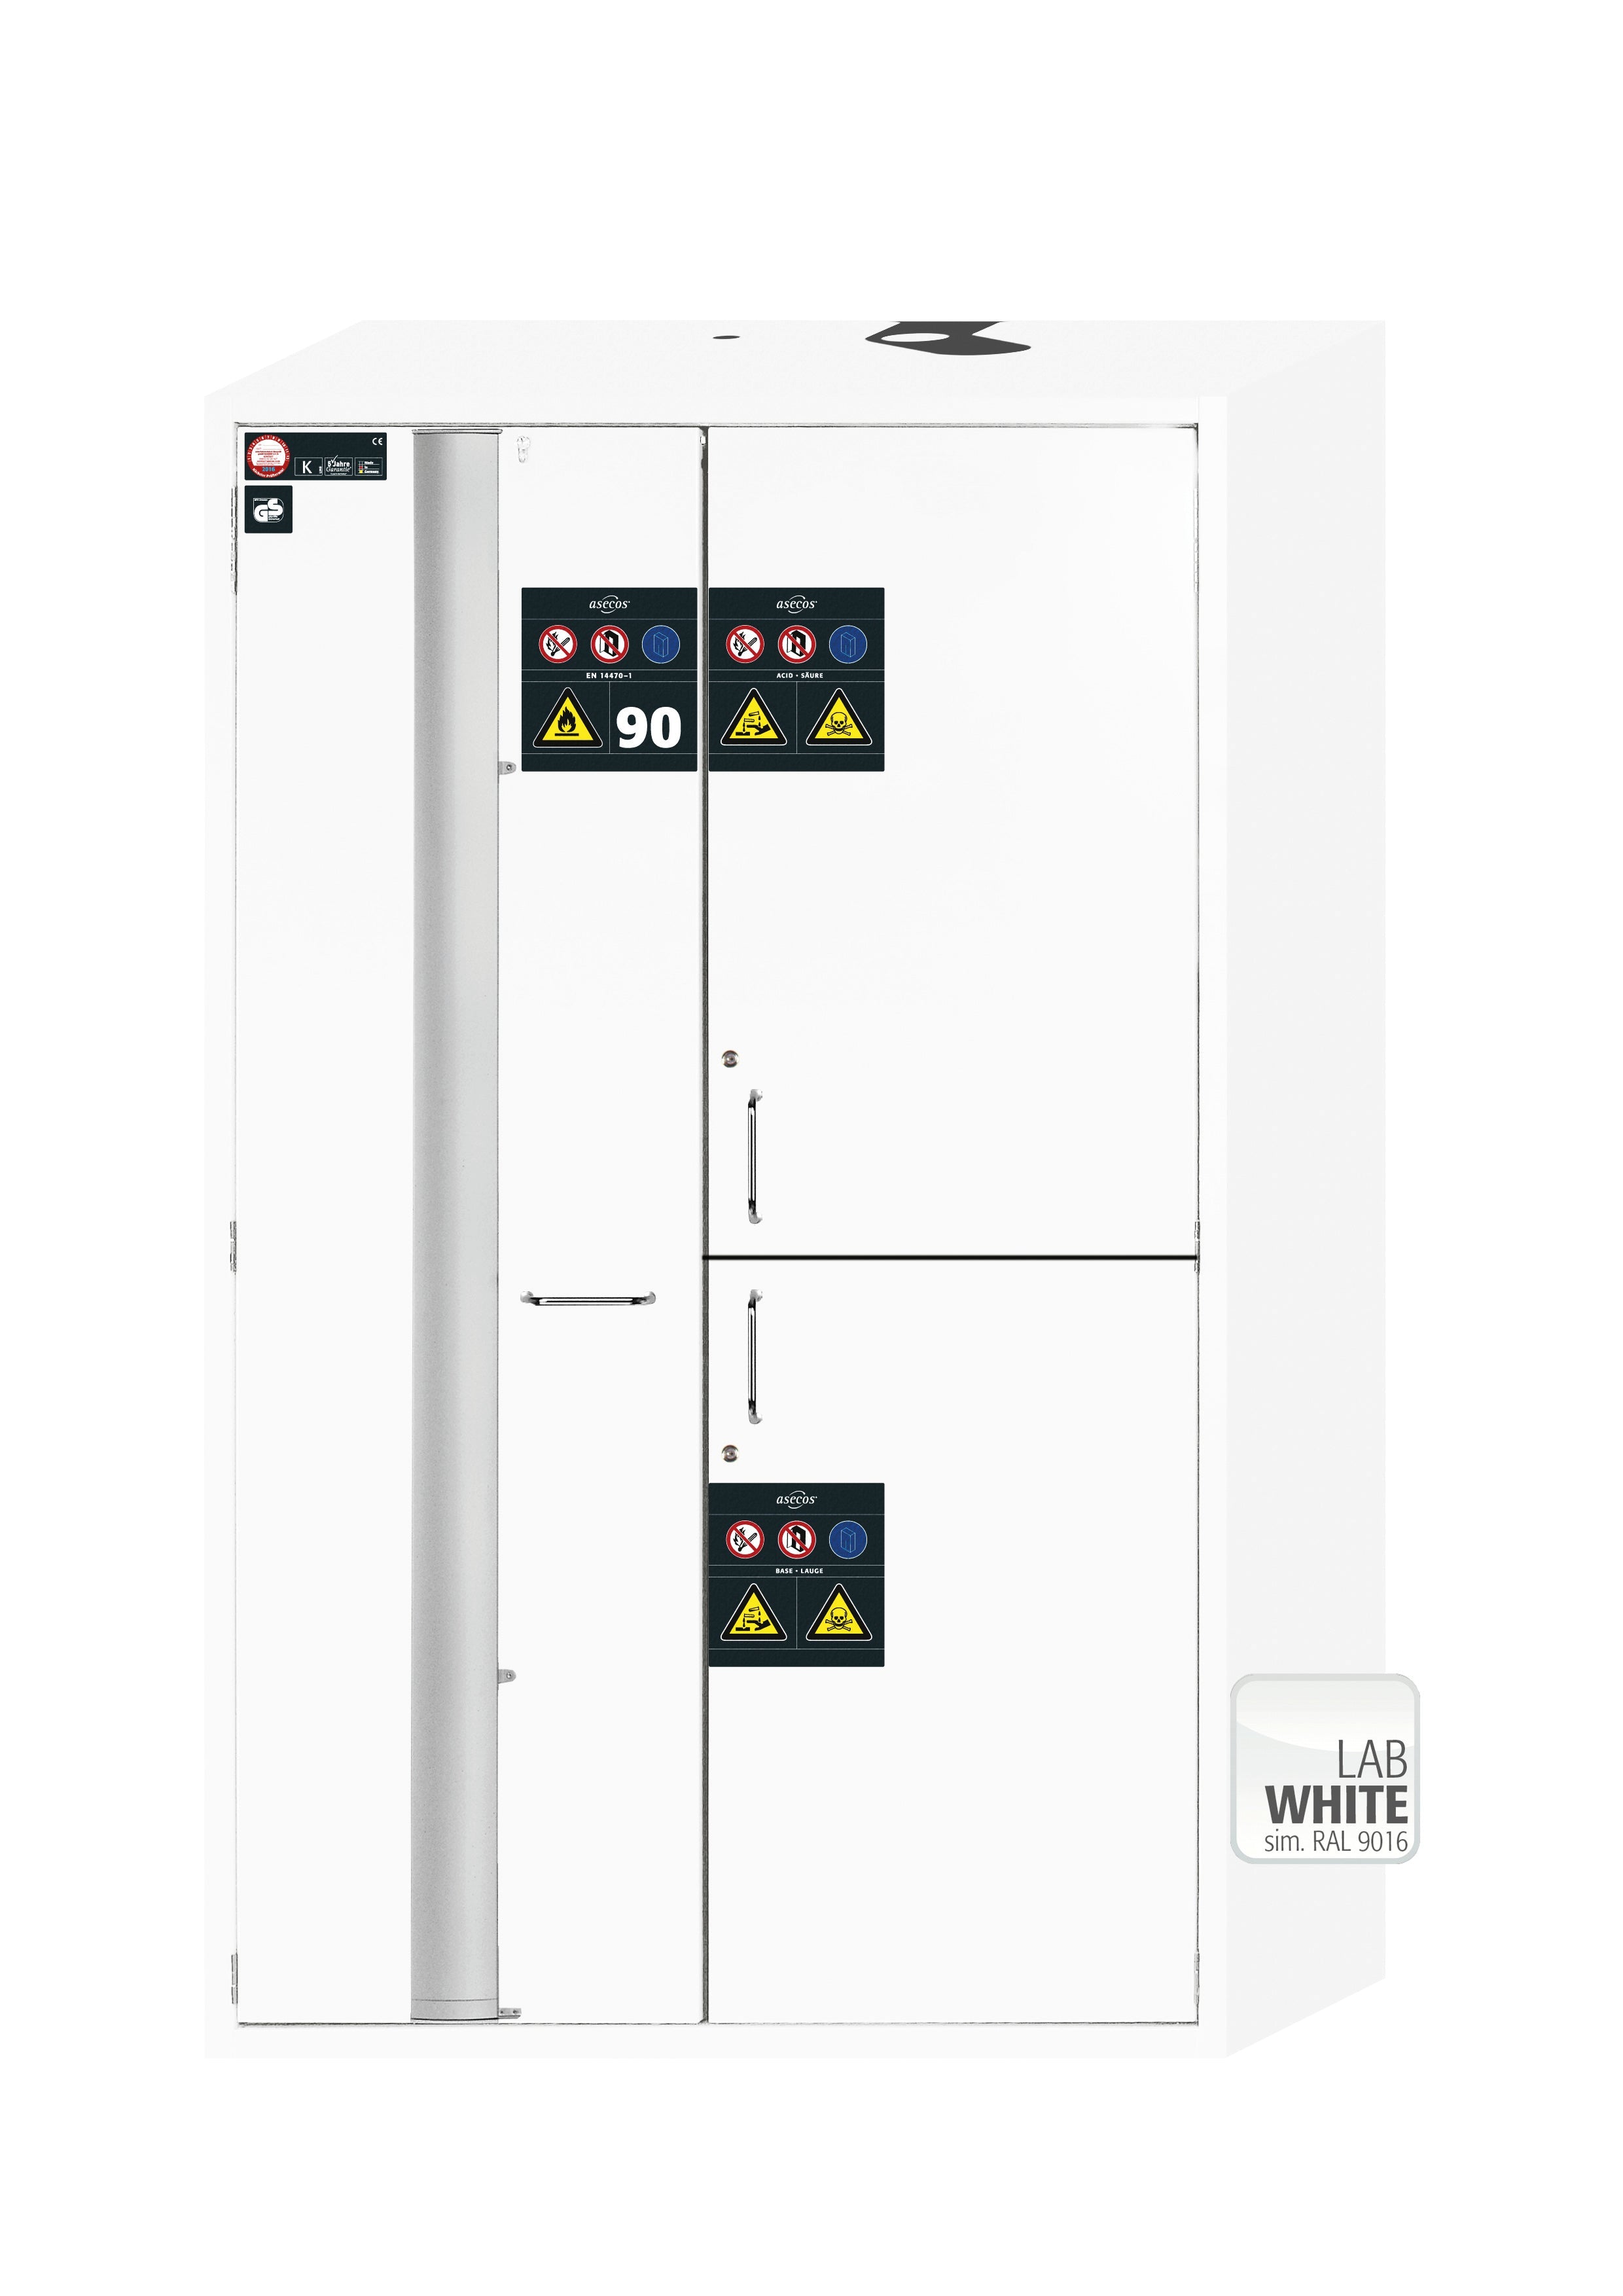 Type 90 combination safety cabinet K-PHOENIX Vol.2-90 model K90.196.120.MC.FWAC in laboratory white (similar to RAL 9016) with 2x standard shelves (sheet steel)